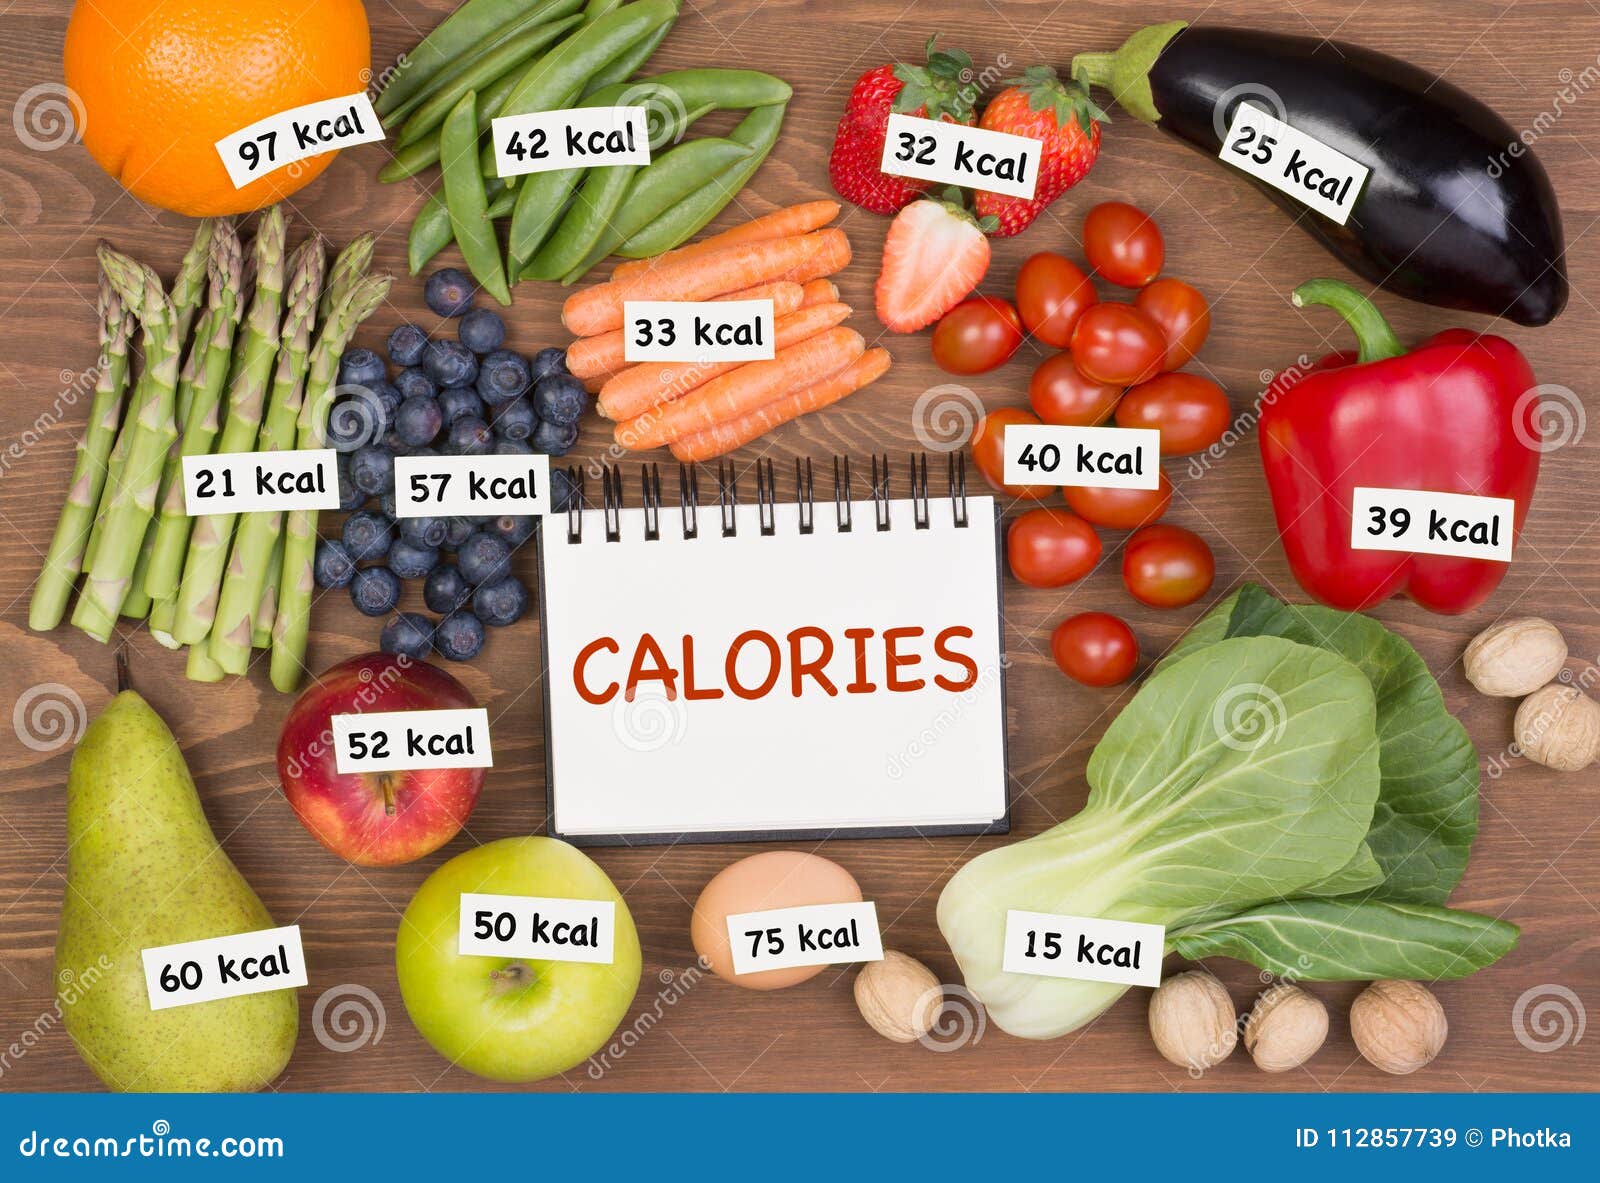 fruits and vegetables with calories labels